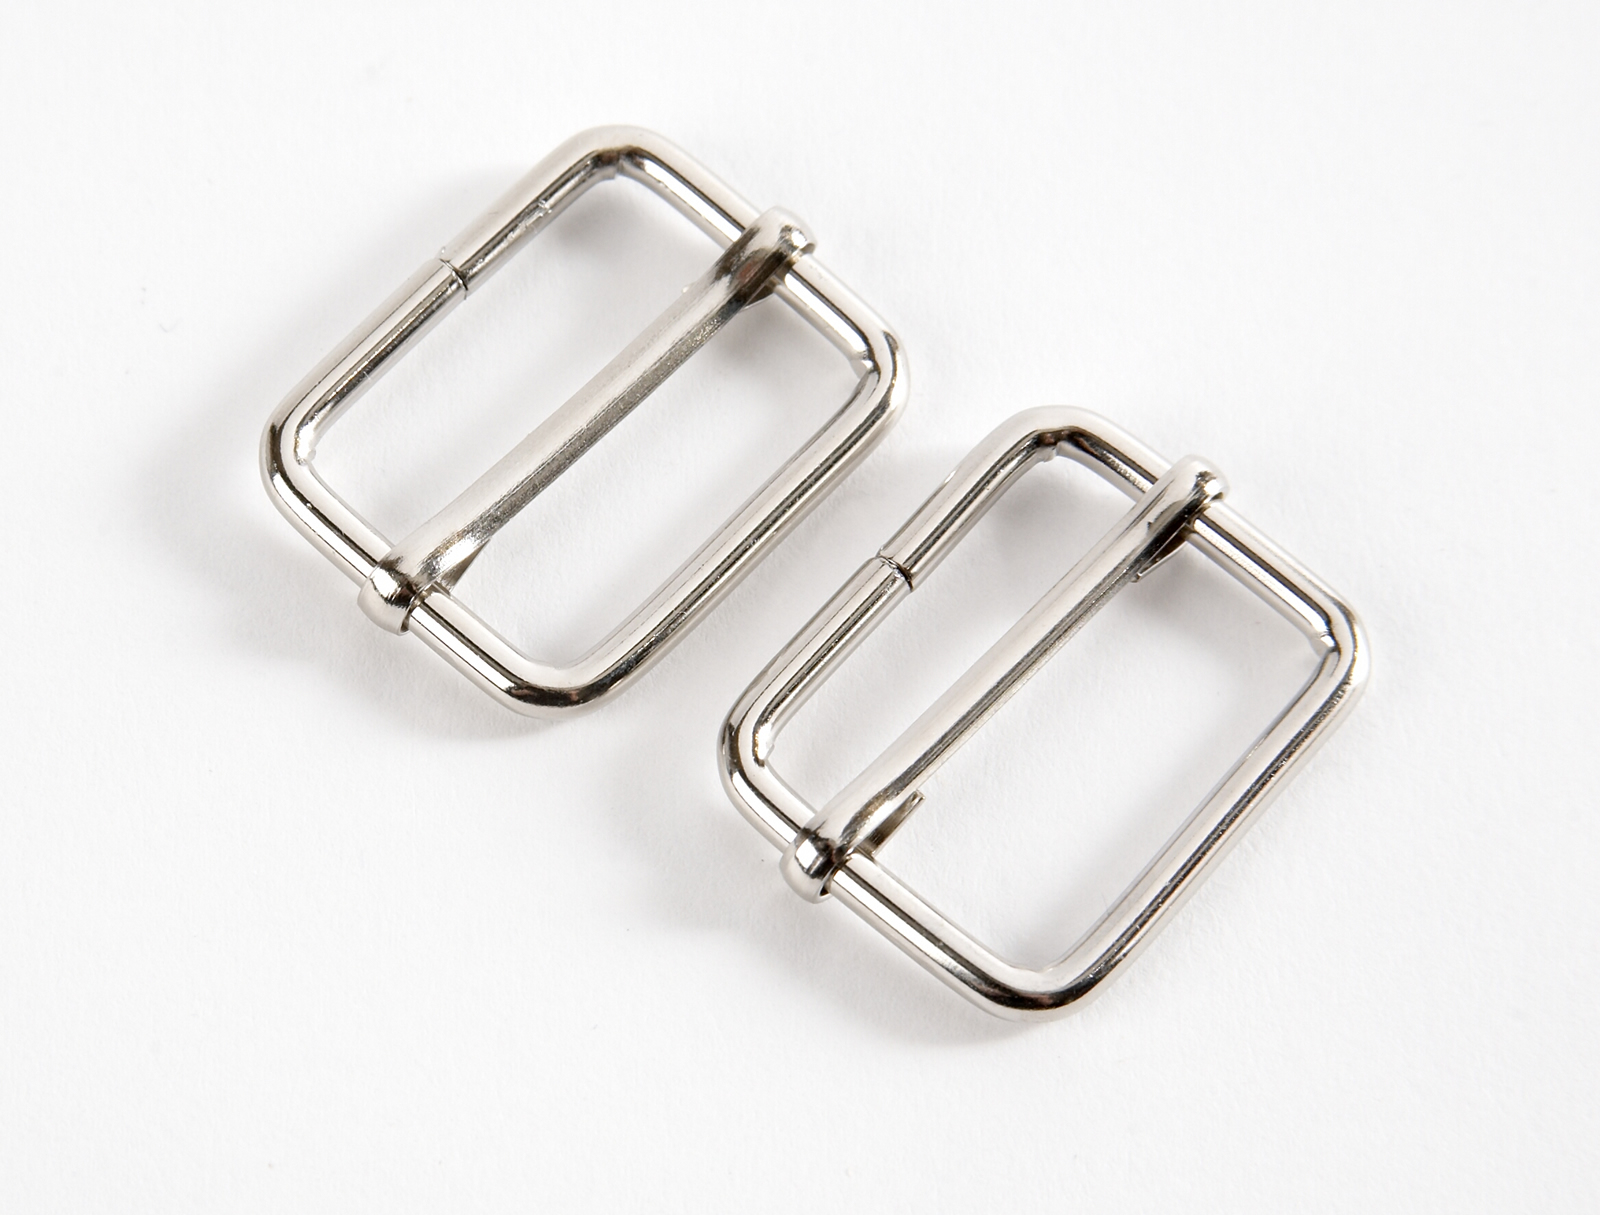 1" Silver Tone Sliders for Bag Straps - Pack of 2